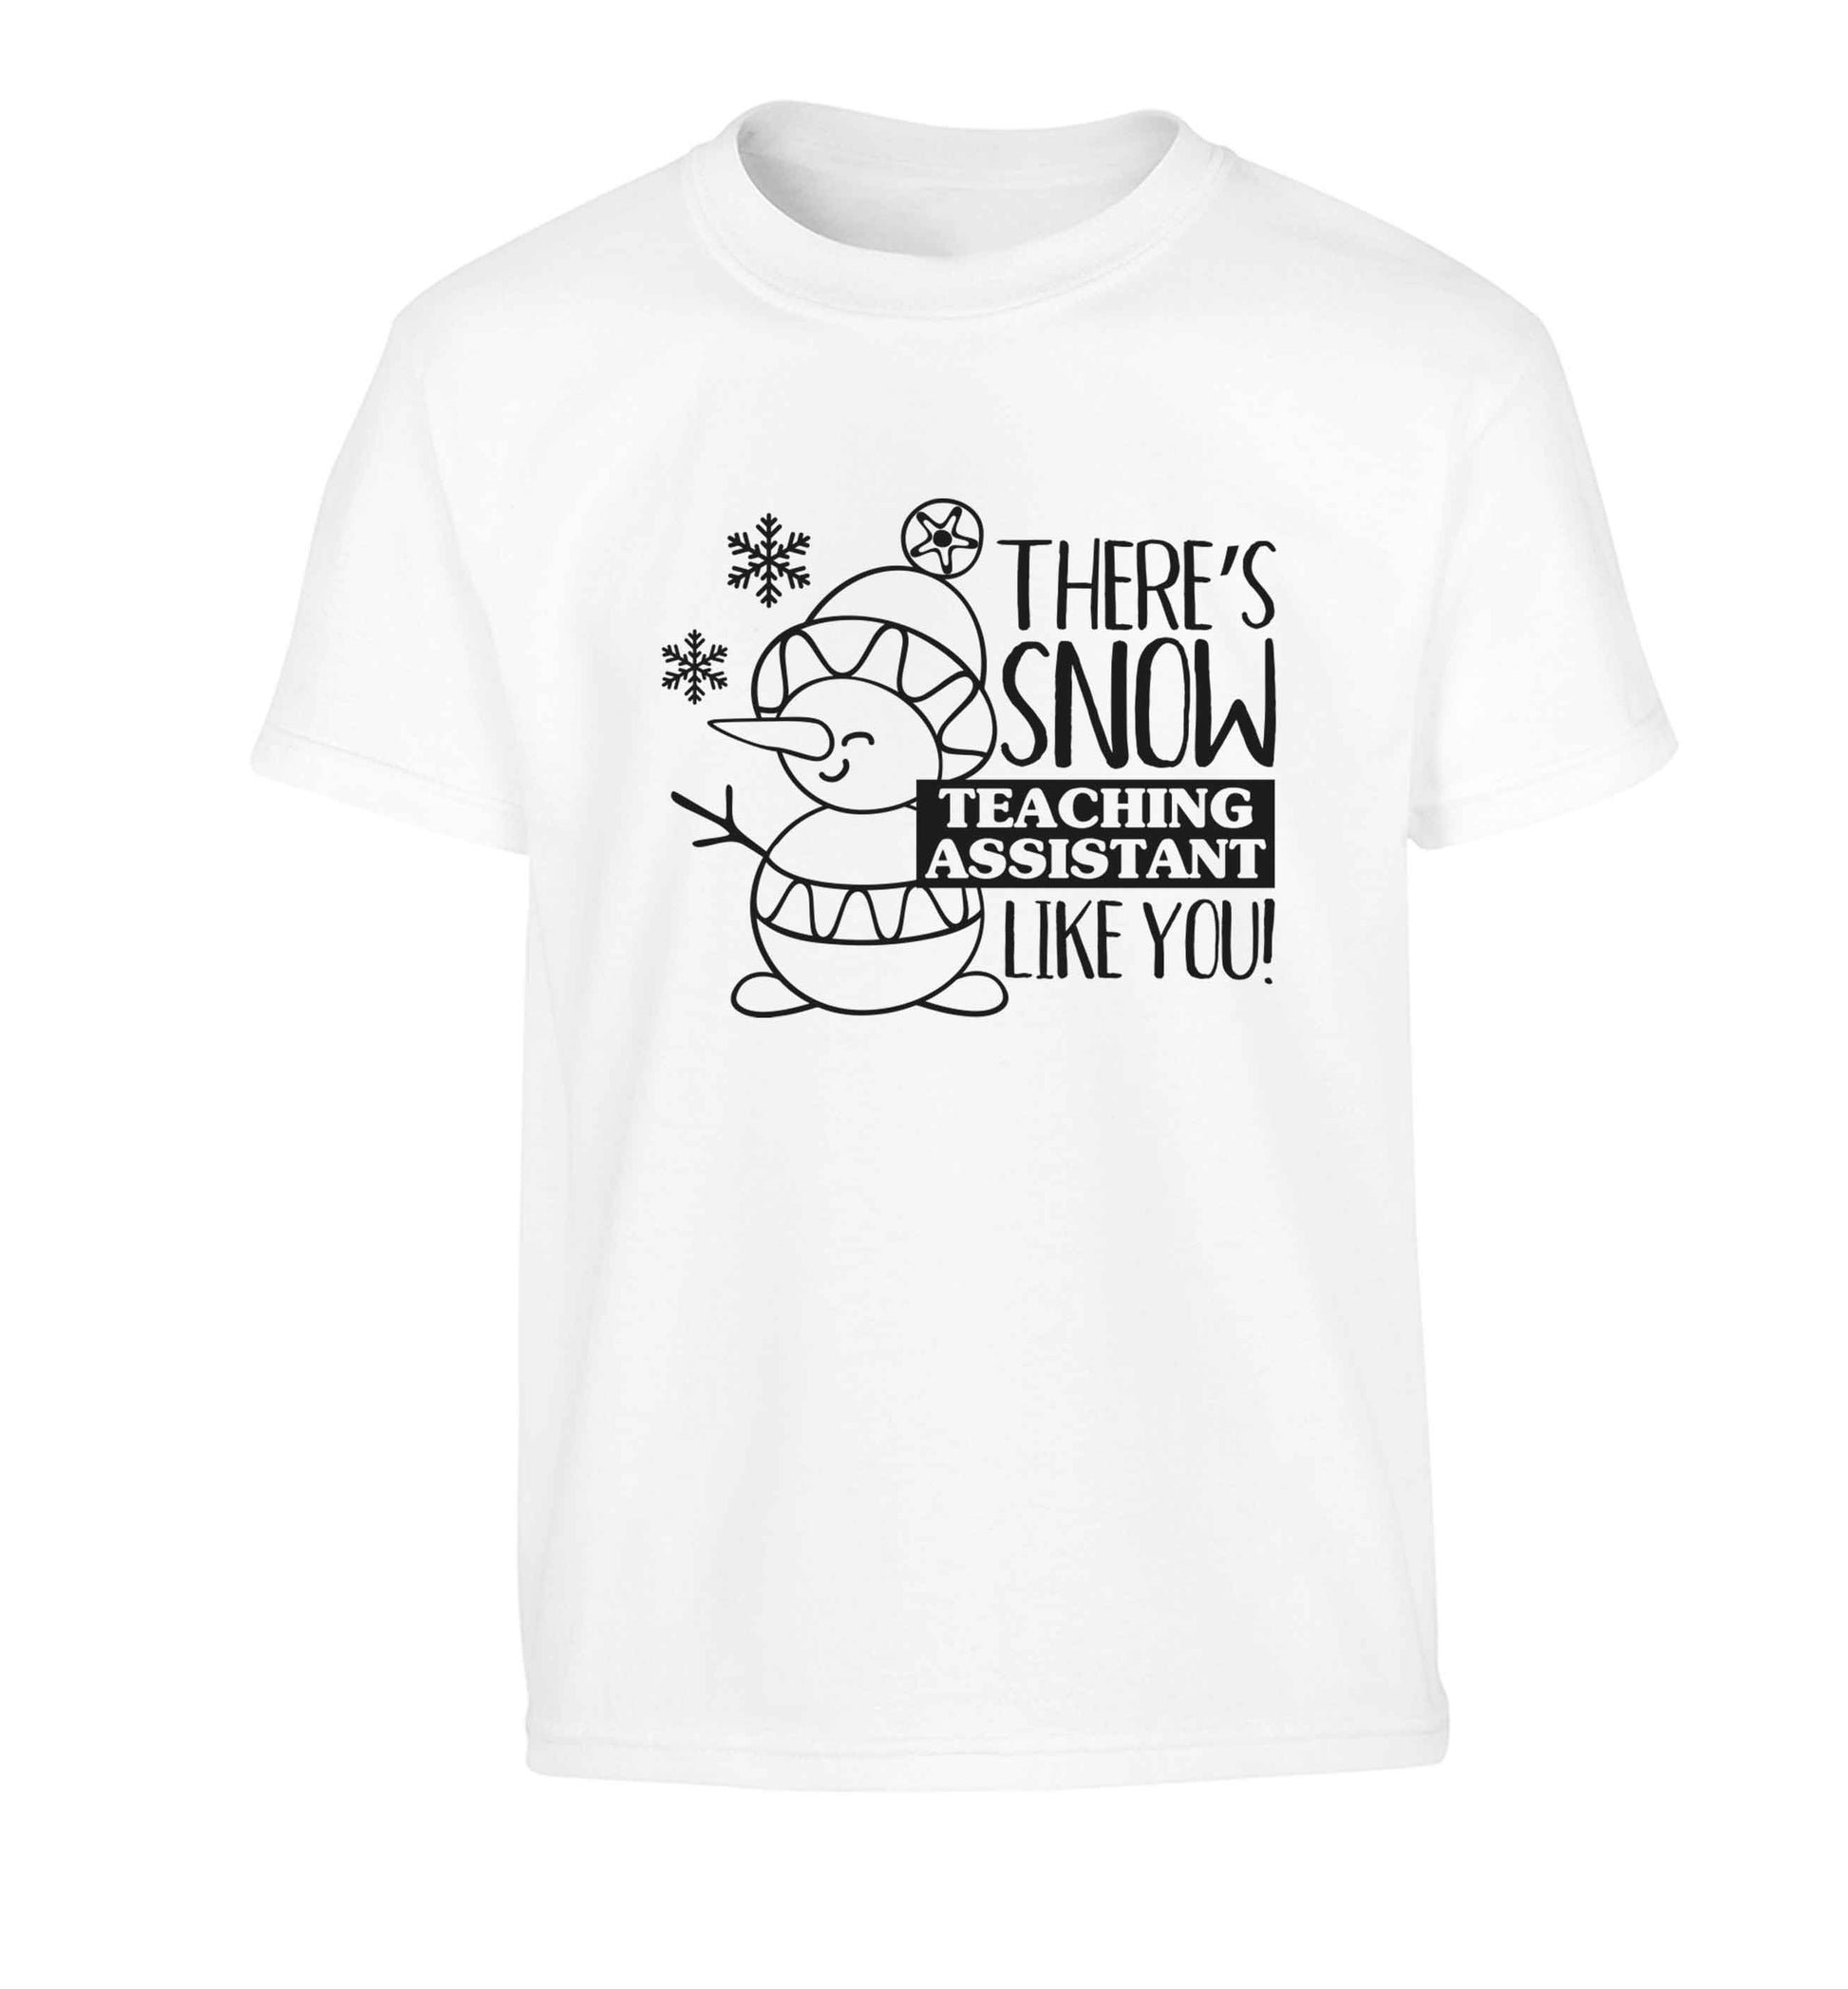 There's snow teaching assistant like you Children's white Tshirt 12-13 Years